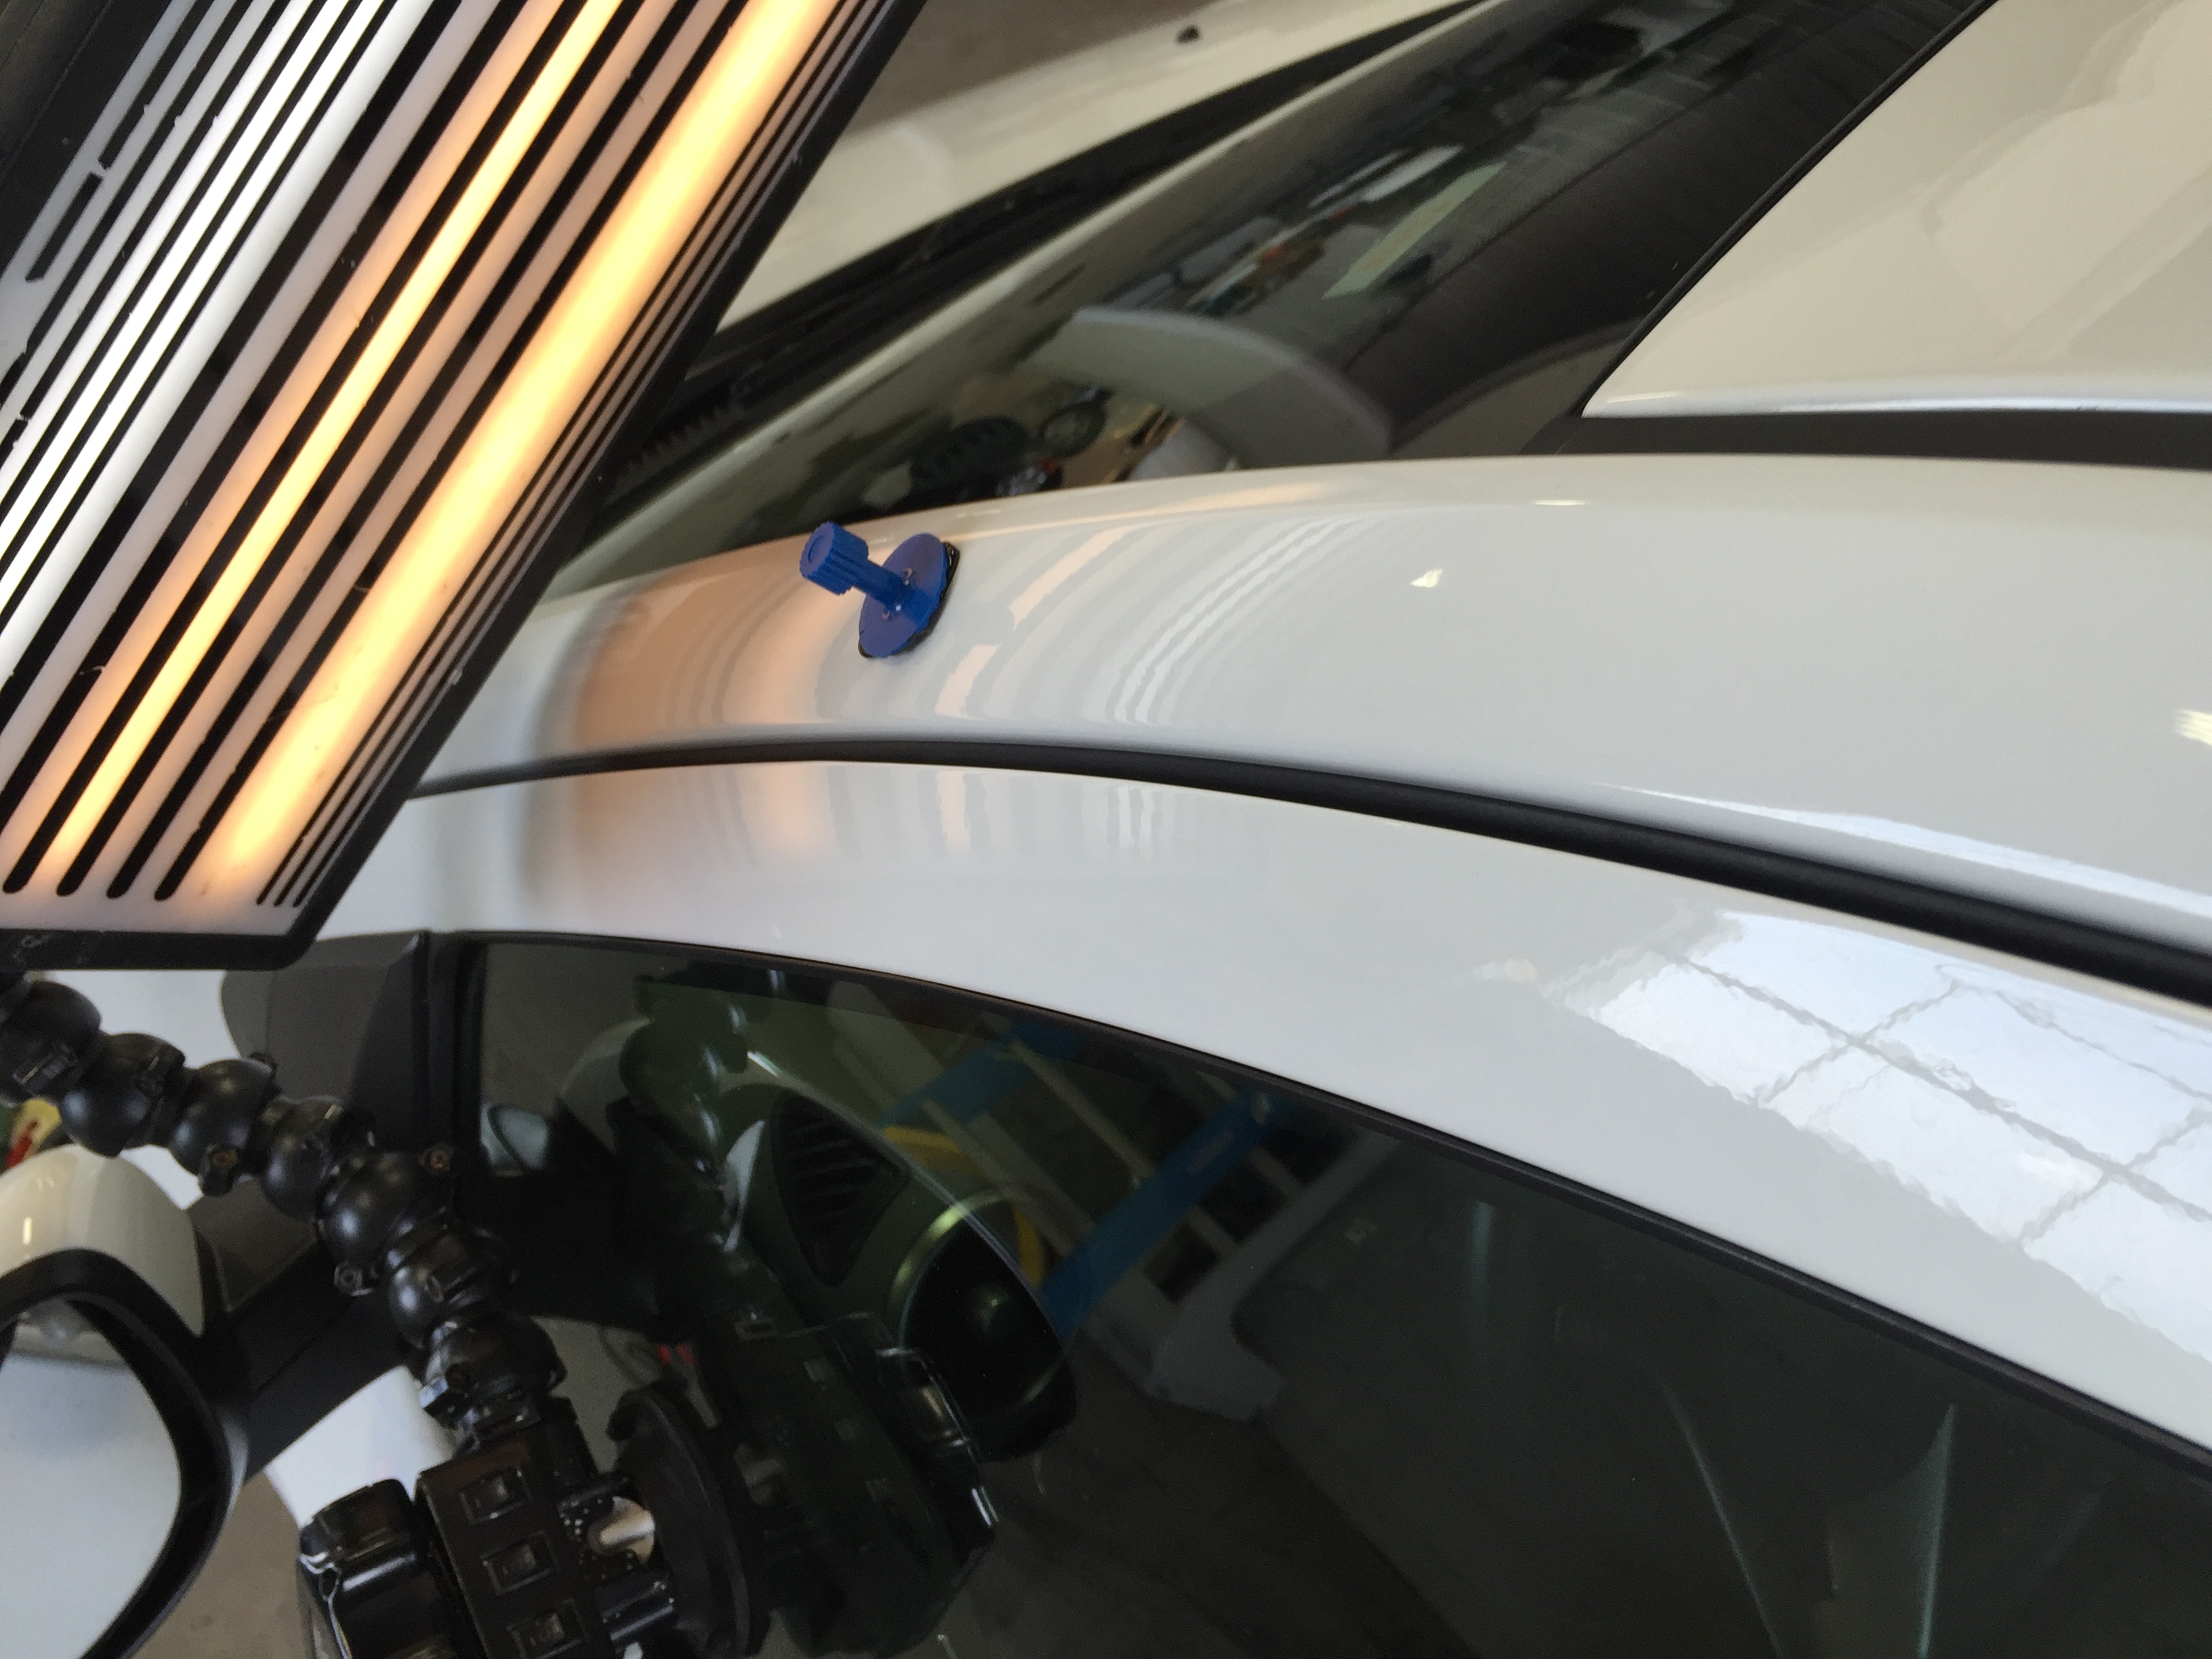 2015 Chevy Sonic, Dent Removal on PIllar, Images, Hail Damage, Paintless Dent Removal, Springfield, IL, http://217dent.com